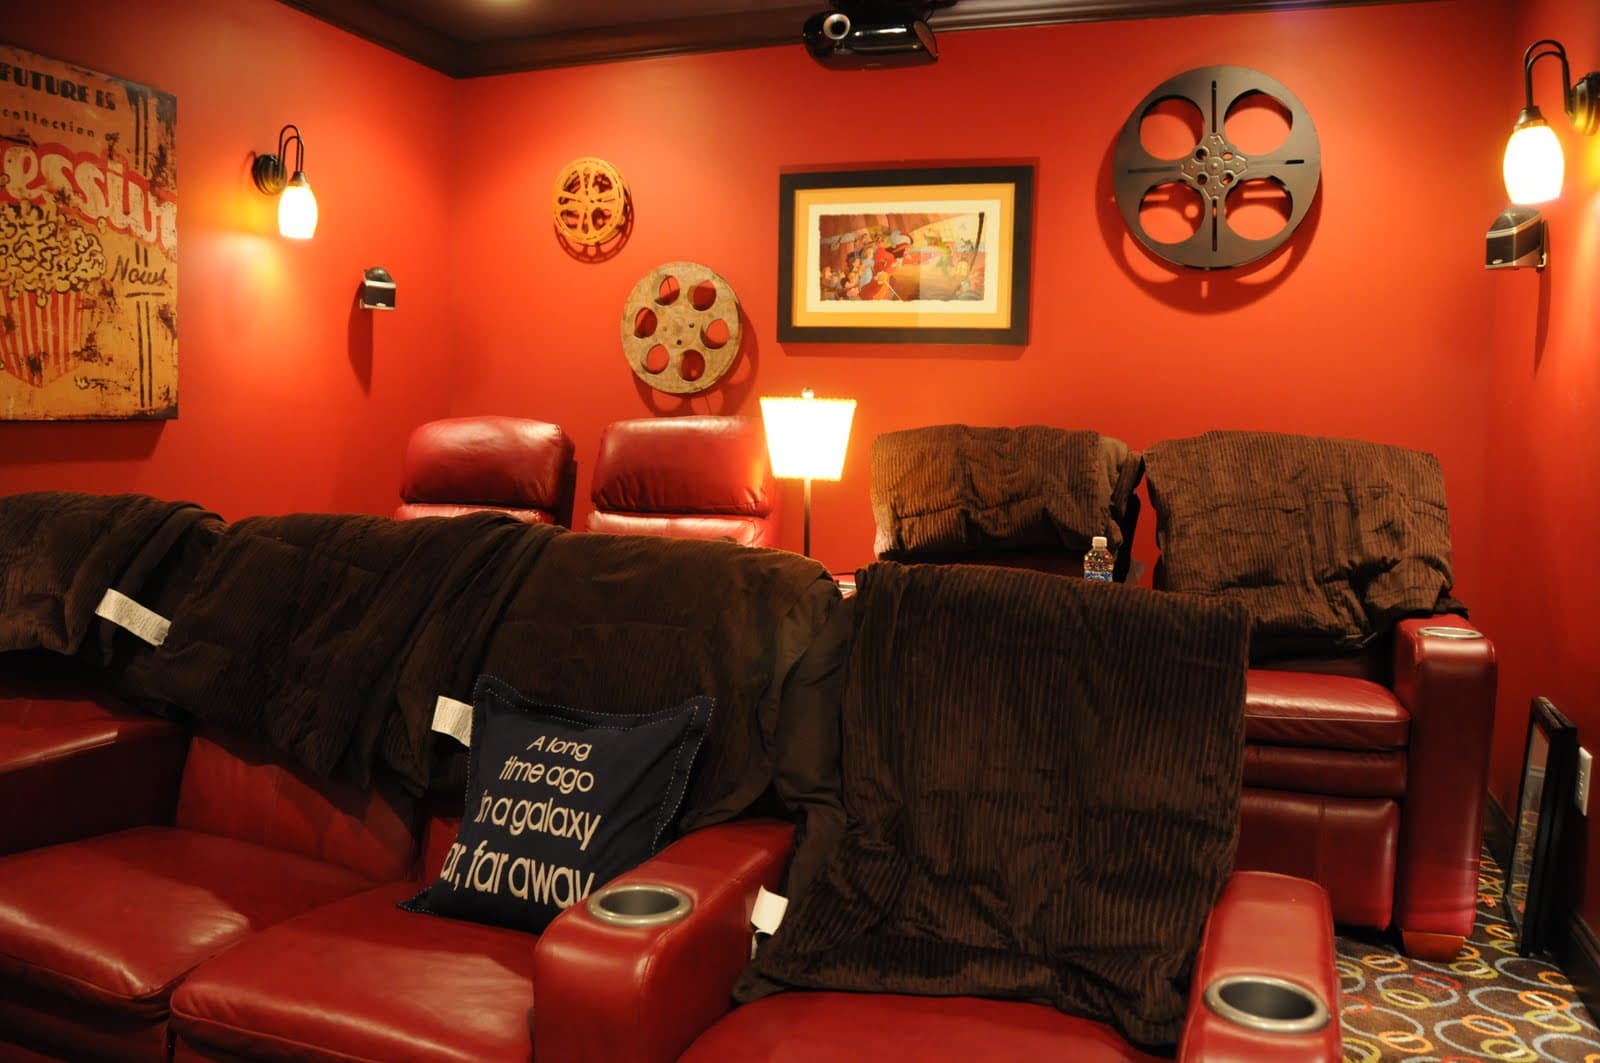 Home Theater Room Decorating Ideas - The Polkadot Chair